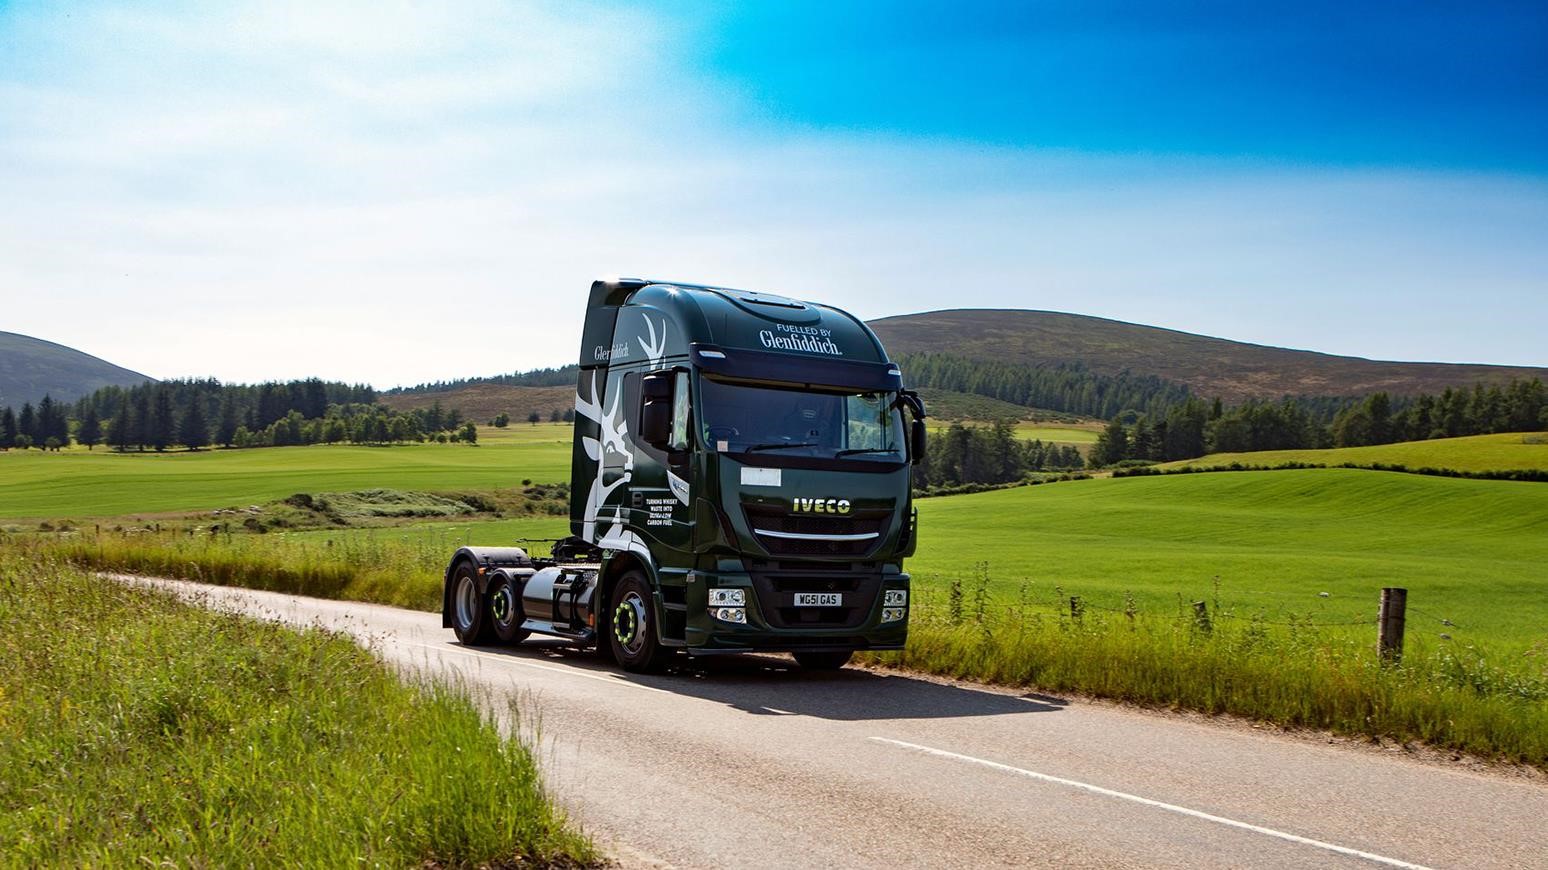 Glenfiddich & IVECO Partner To Decarbonise Transport Operations